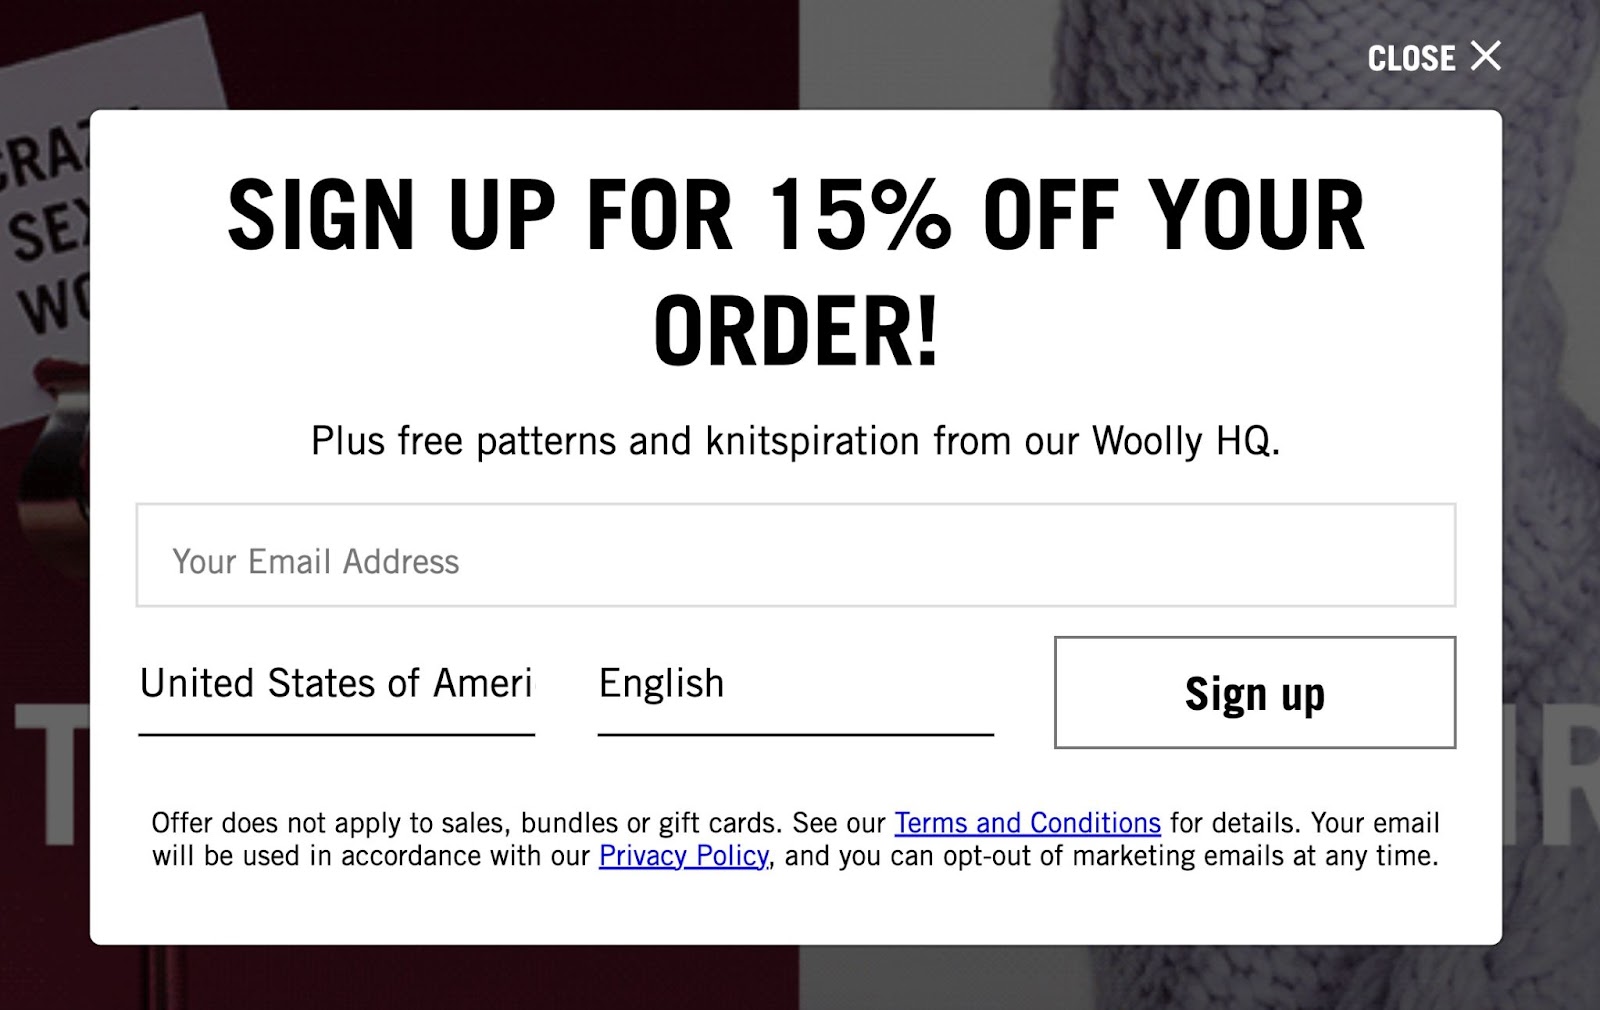 Wool and the Gang's sign-up form, for 15% coupon